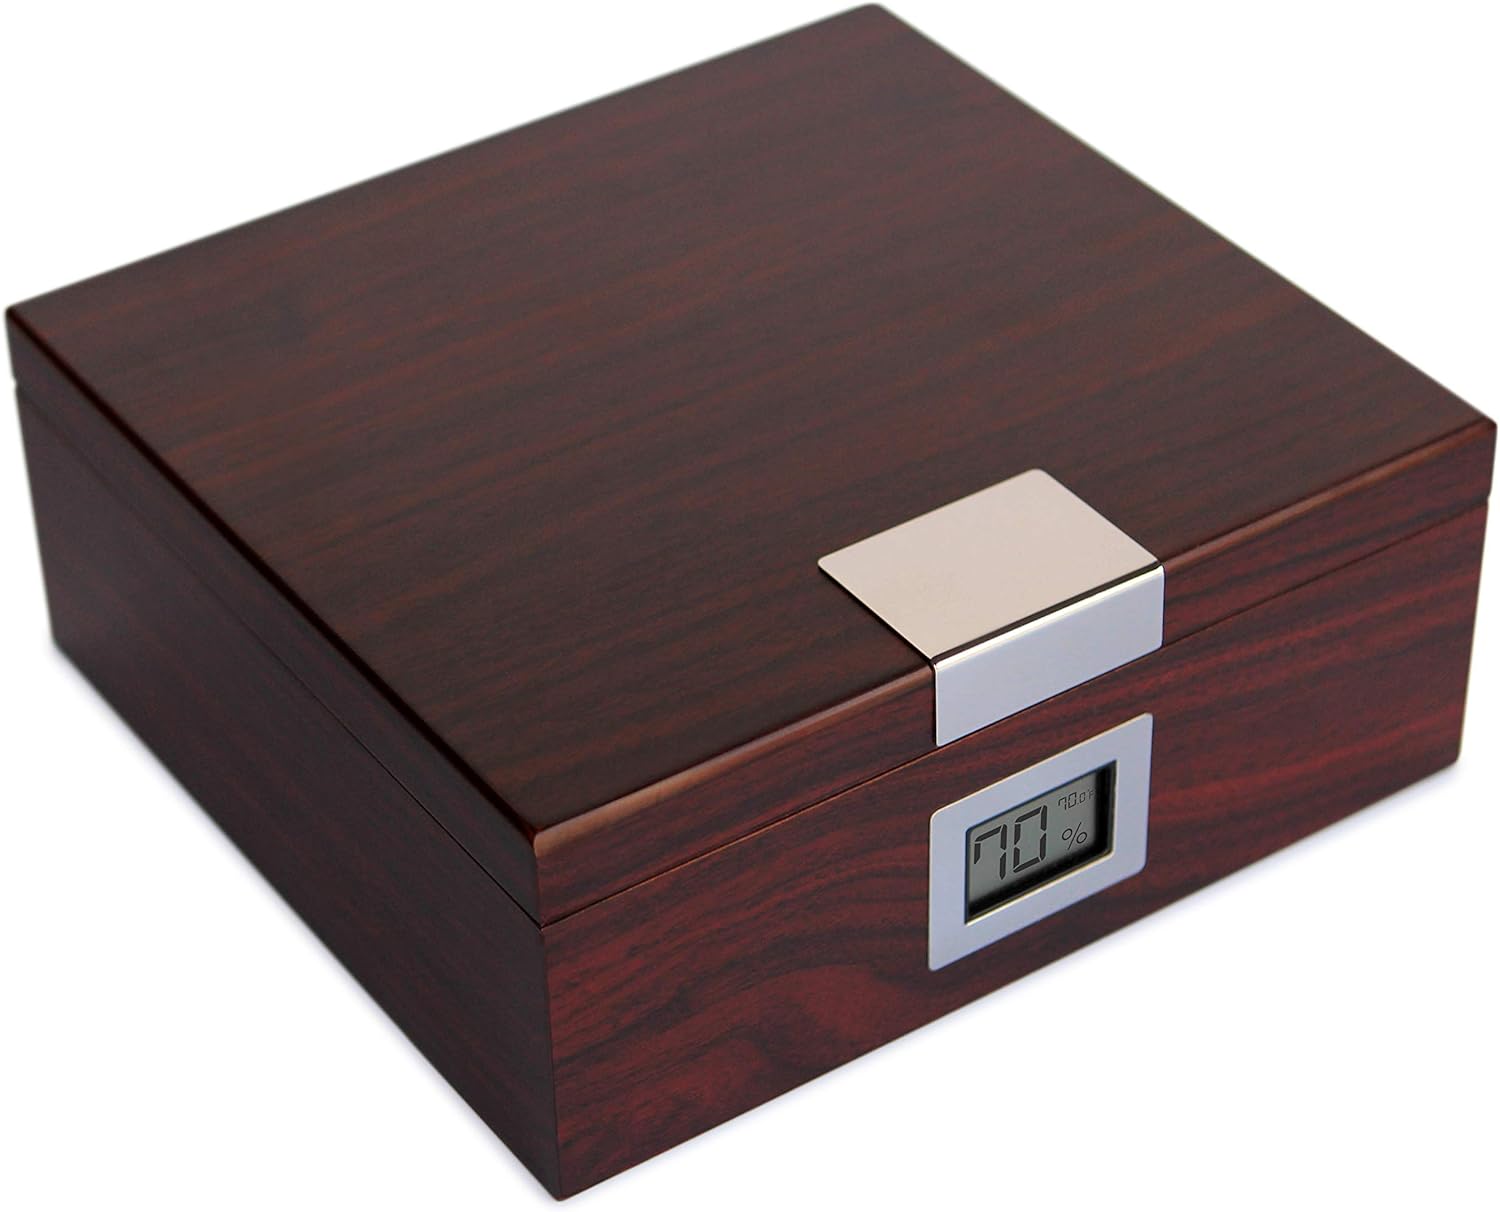 CASE ELEGANCE Handcrafted Cherry Finish Cedar Humidor with Front Digital Hygrometer and Humidifier Gel - Holds (25-50 Cigars)